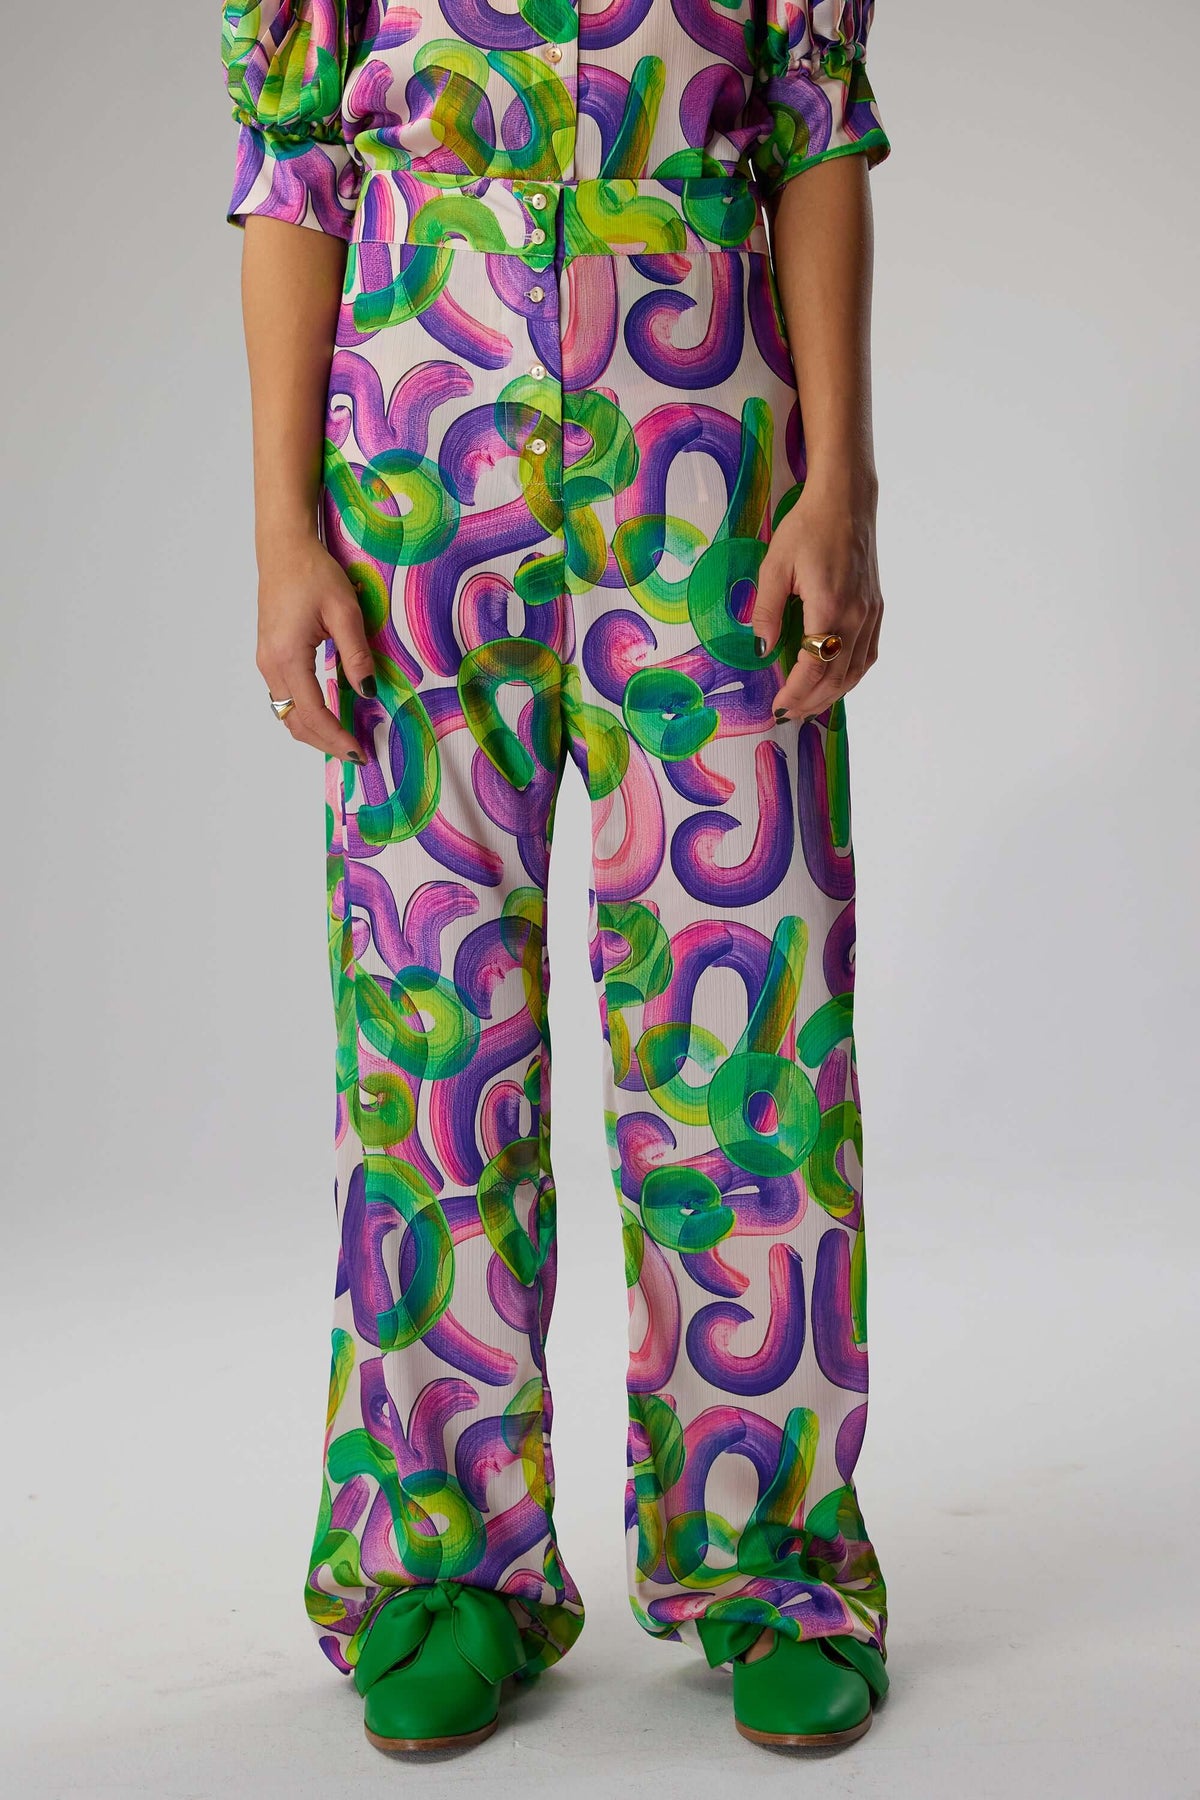 Spartacus pants in Iodine Marshmallow print